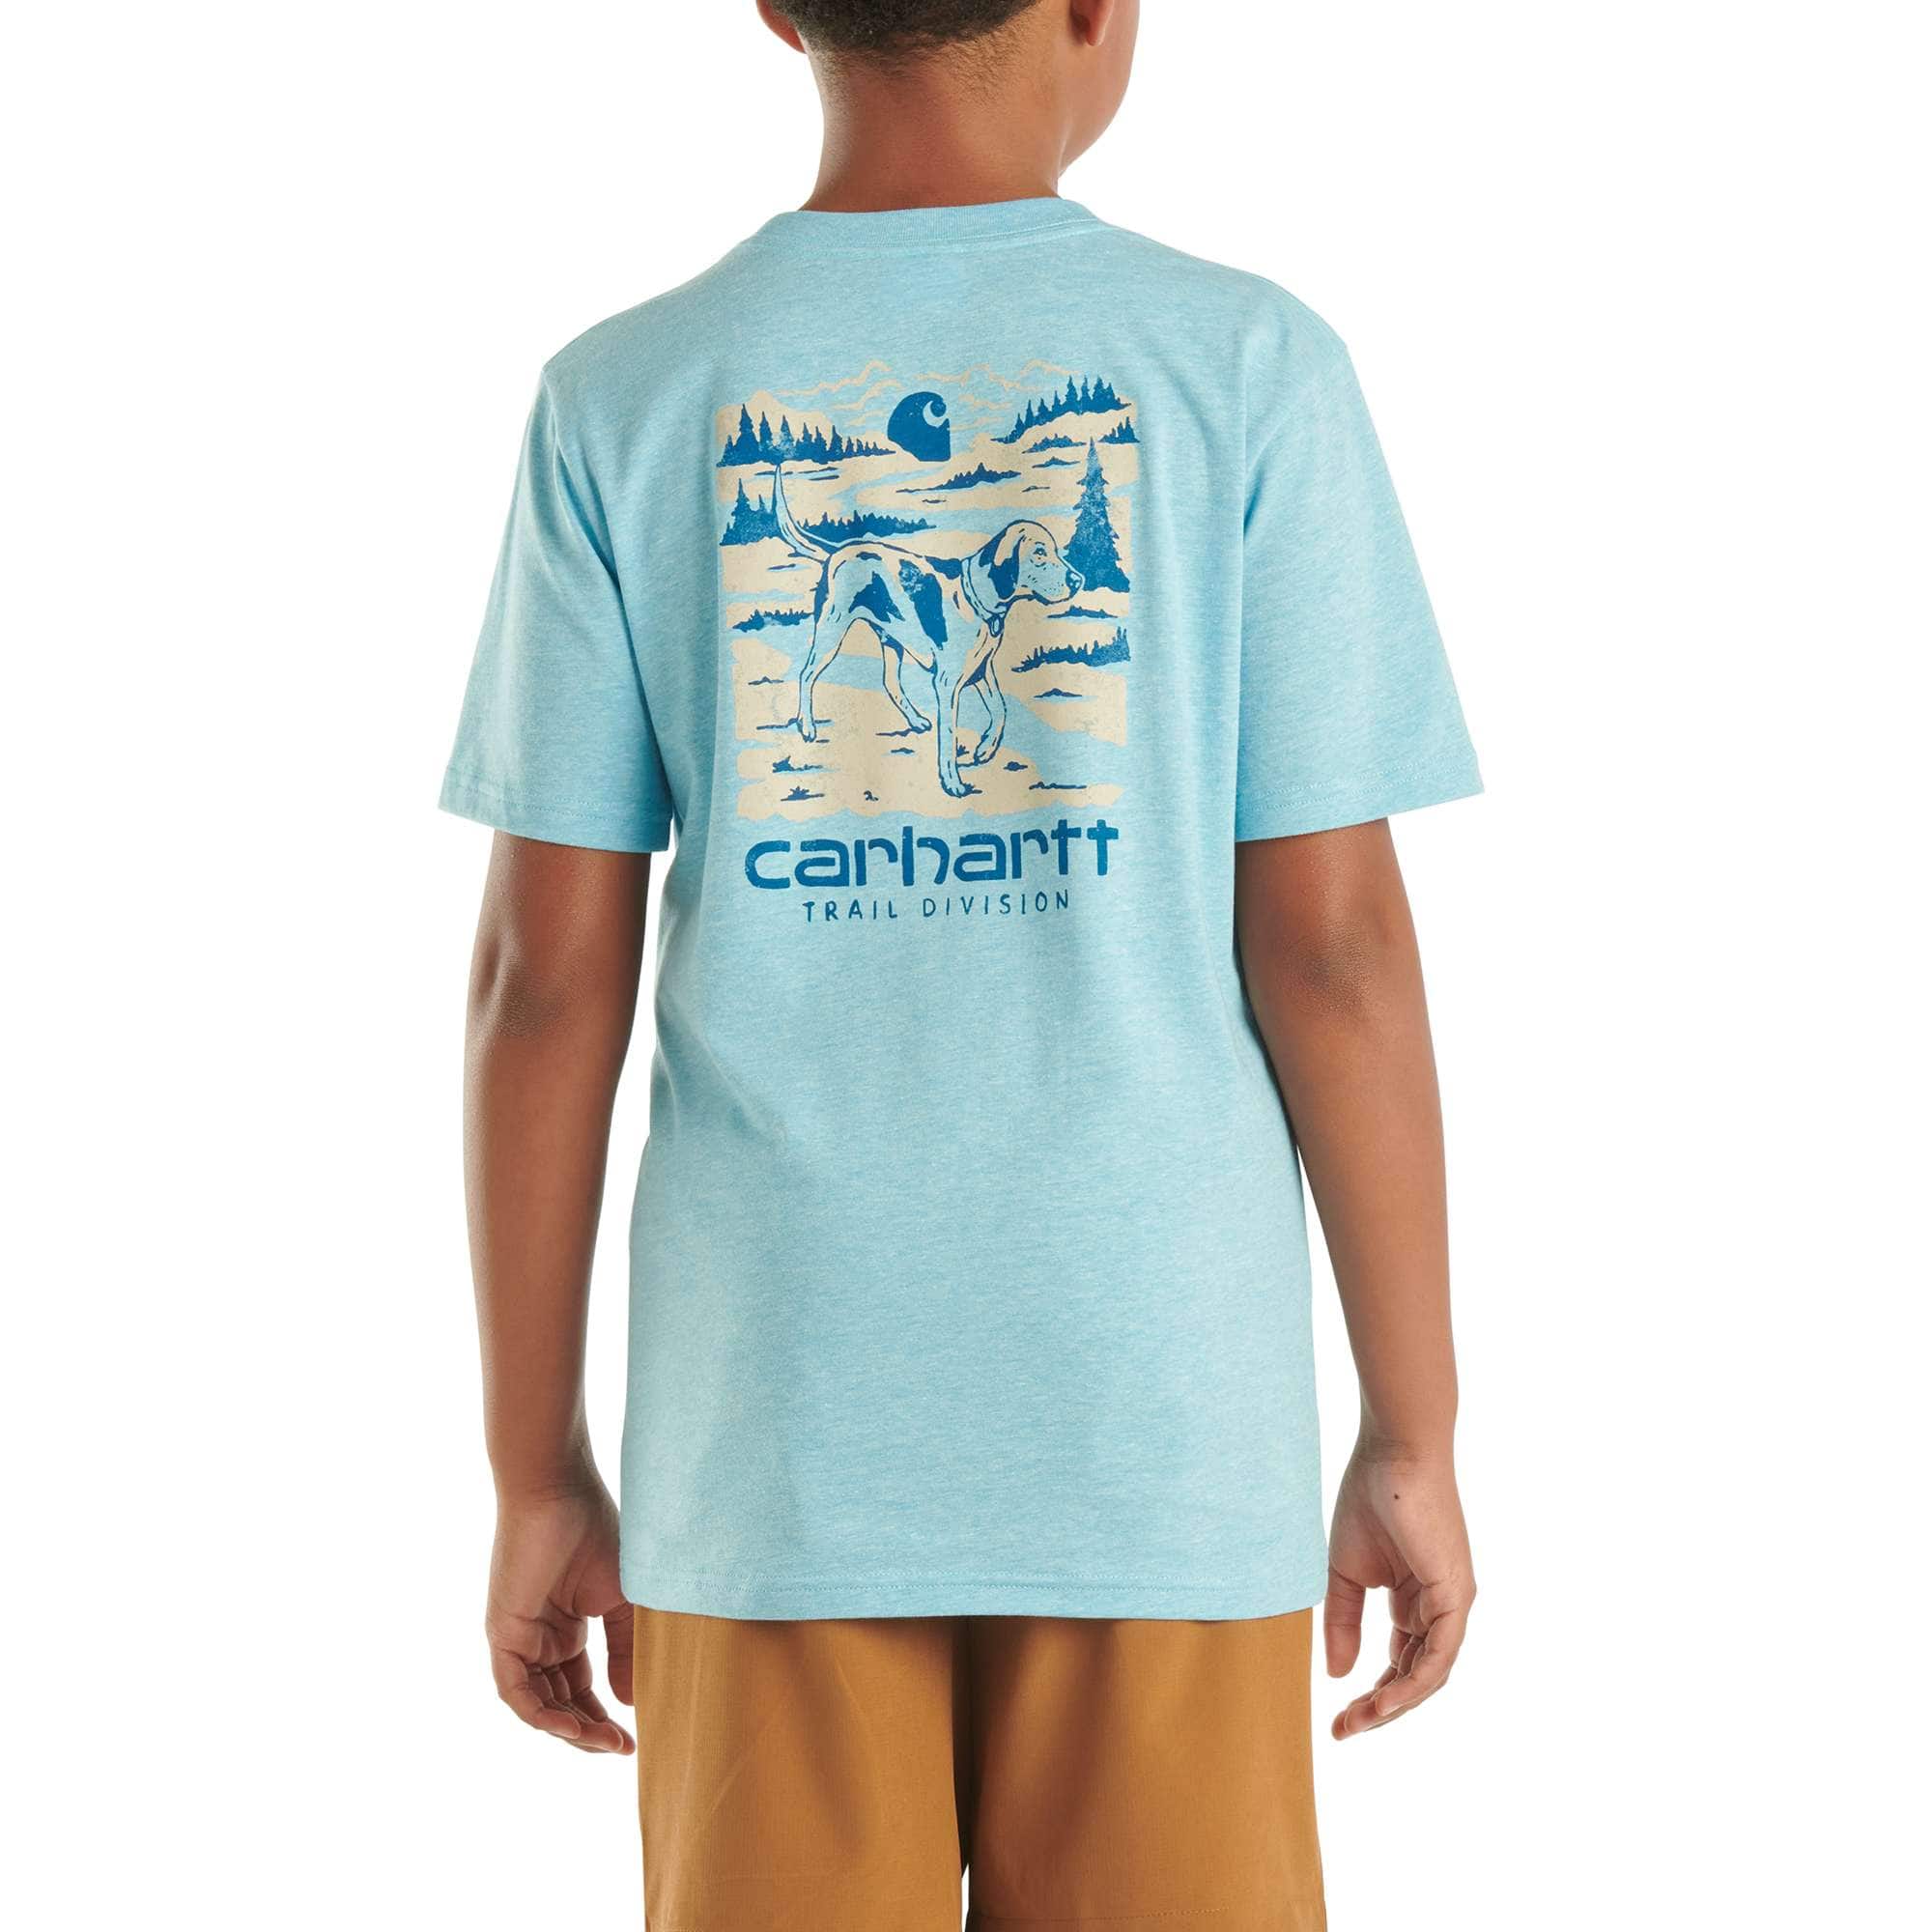 Boys' Short-Sleeve Trail Division T-Shirt (Child/Youth)